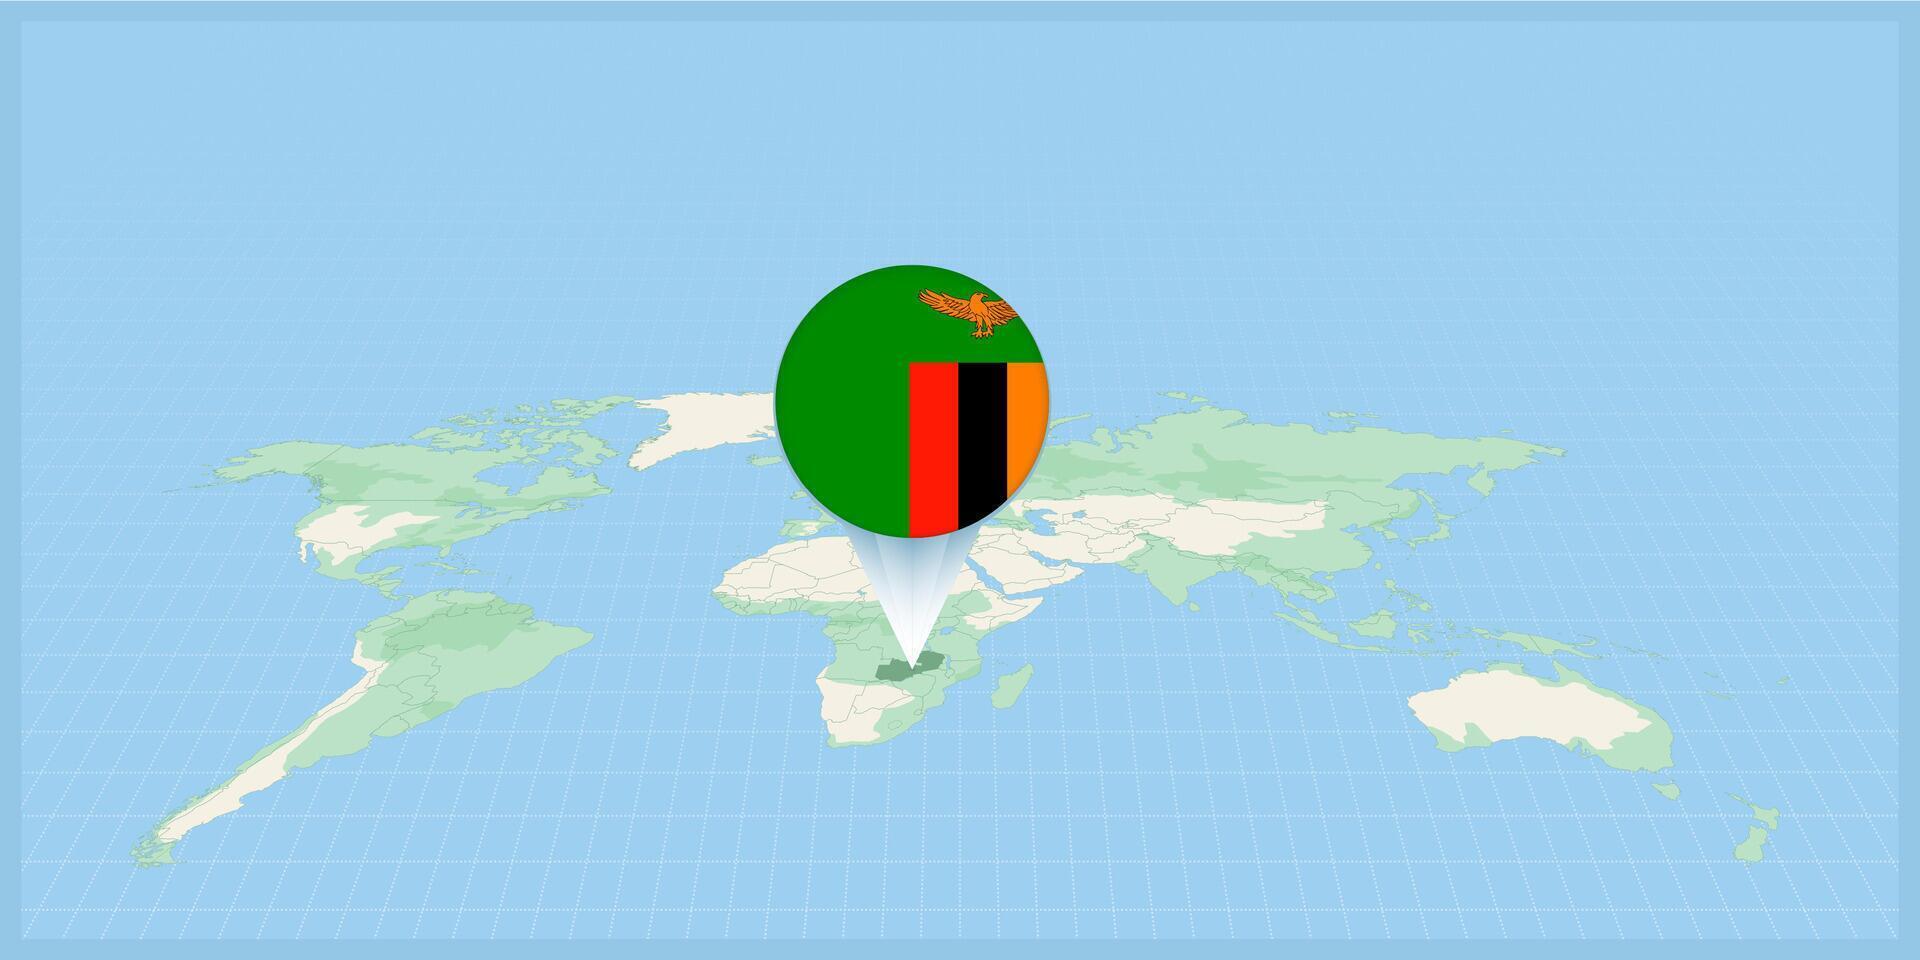 Location of Zambia on the world map, marked with Zambia flag pin. vector